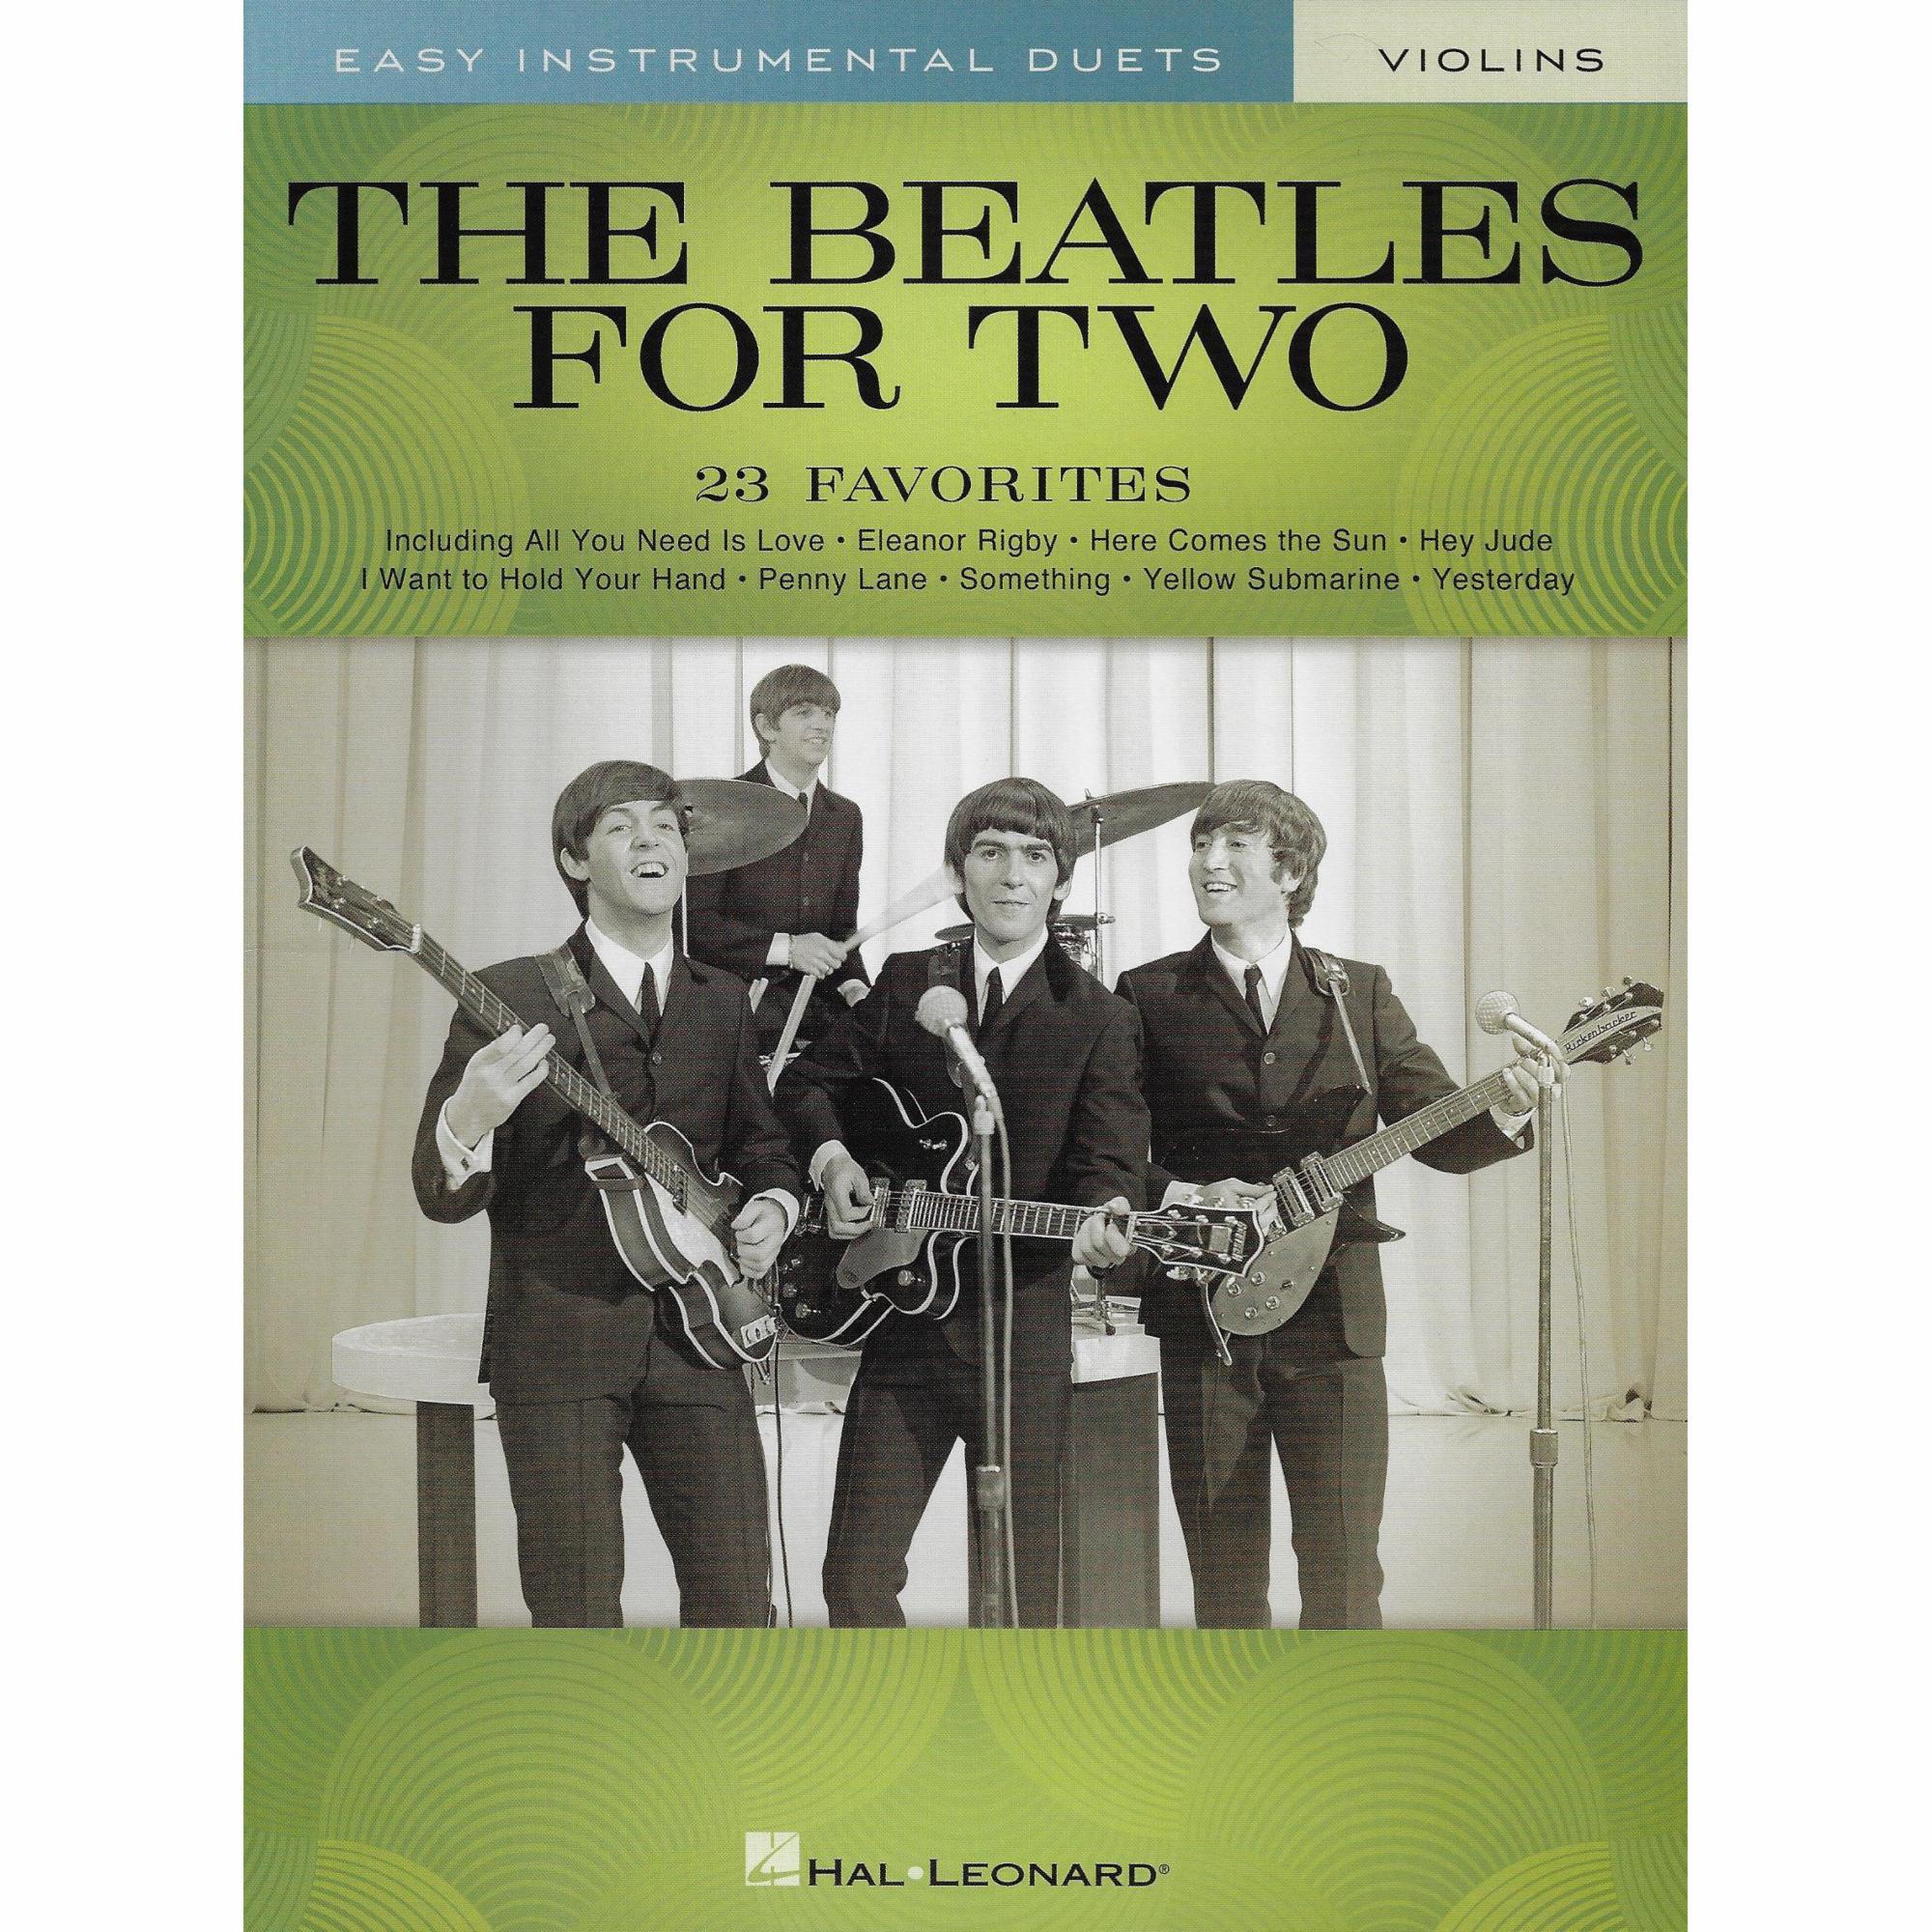 The Beatles for Two Violins and Two Cellos